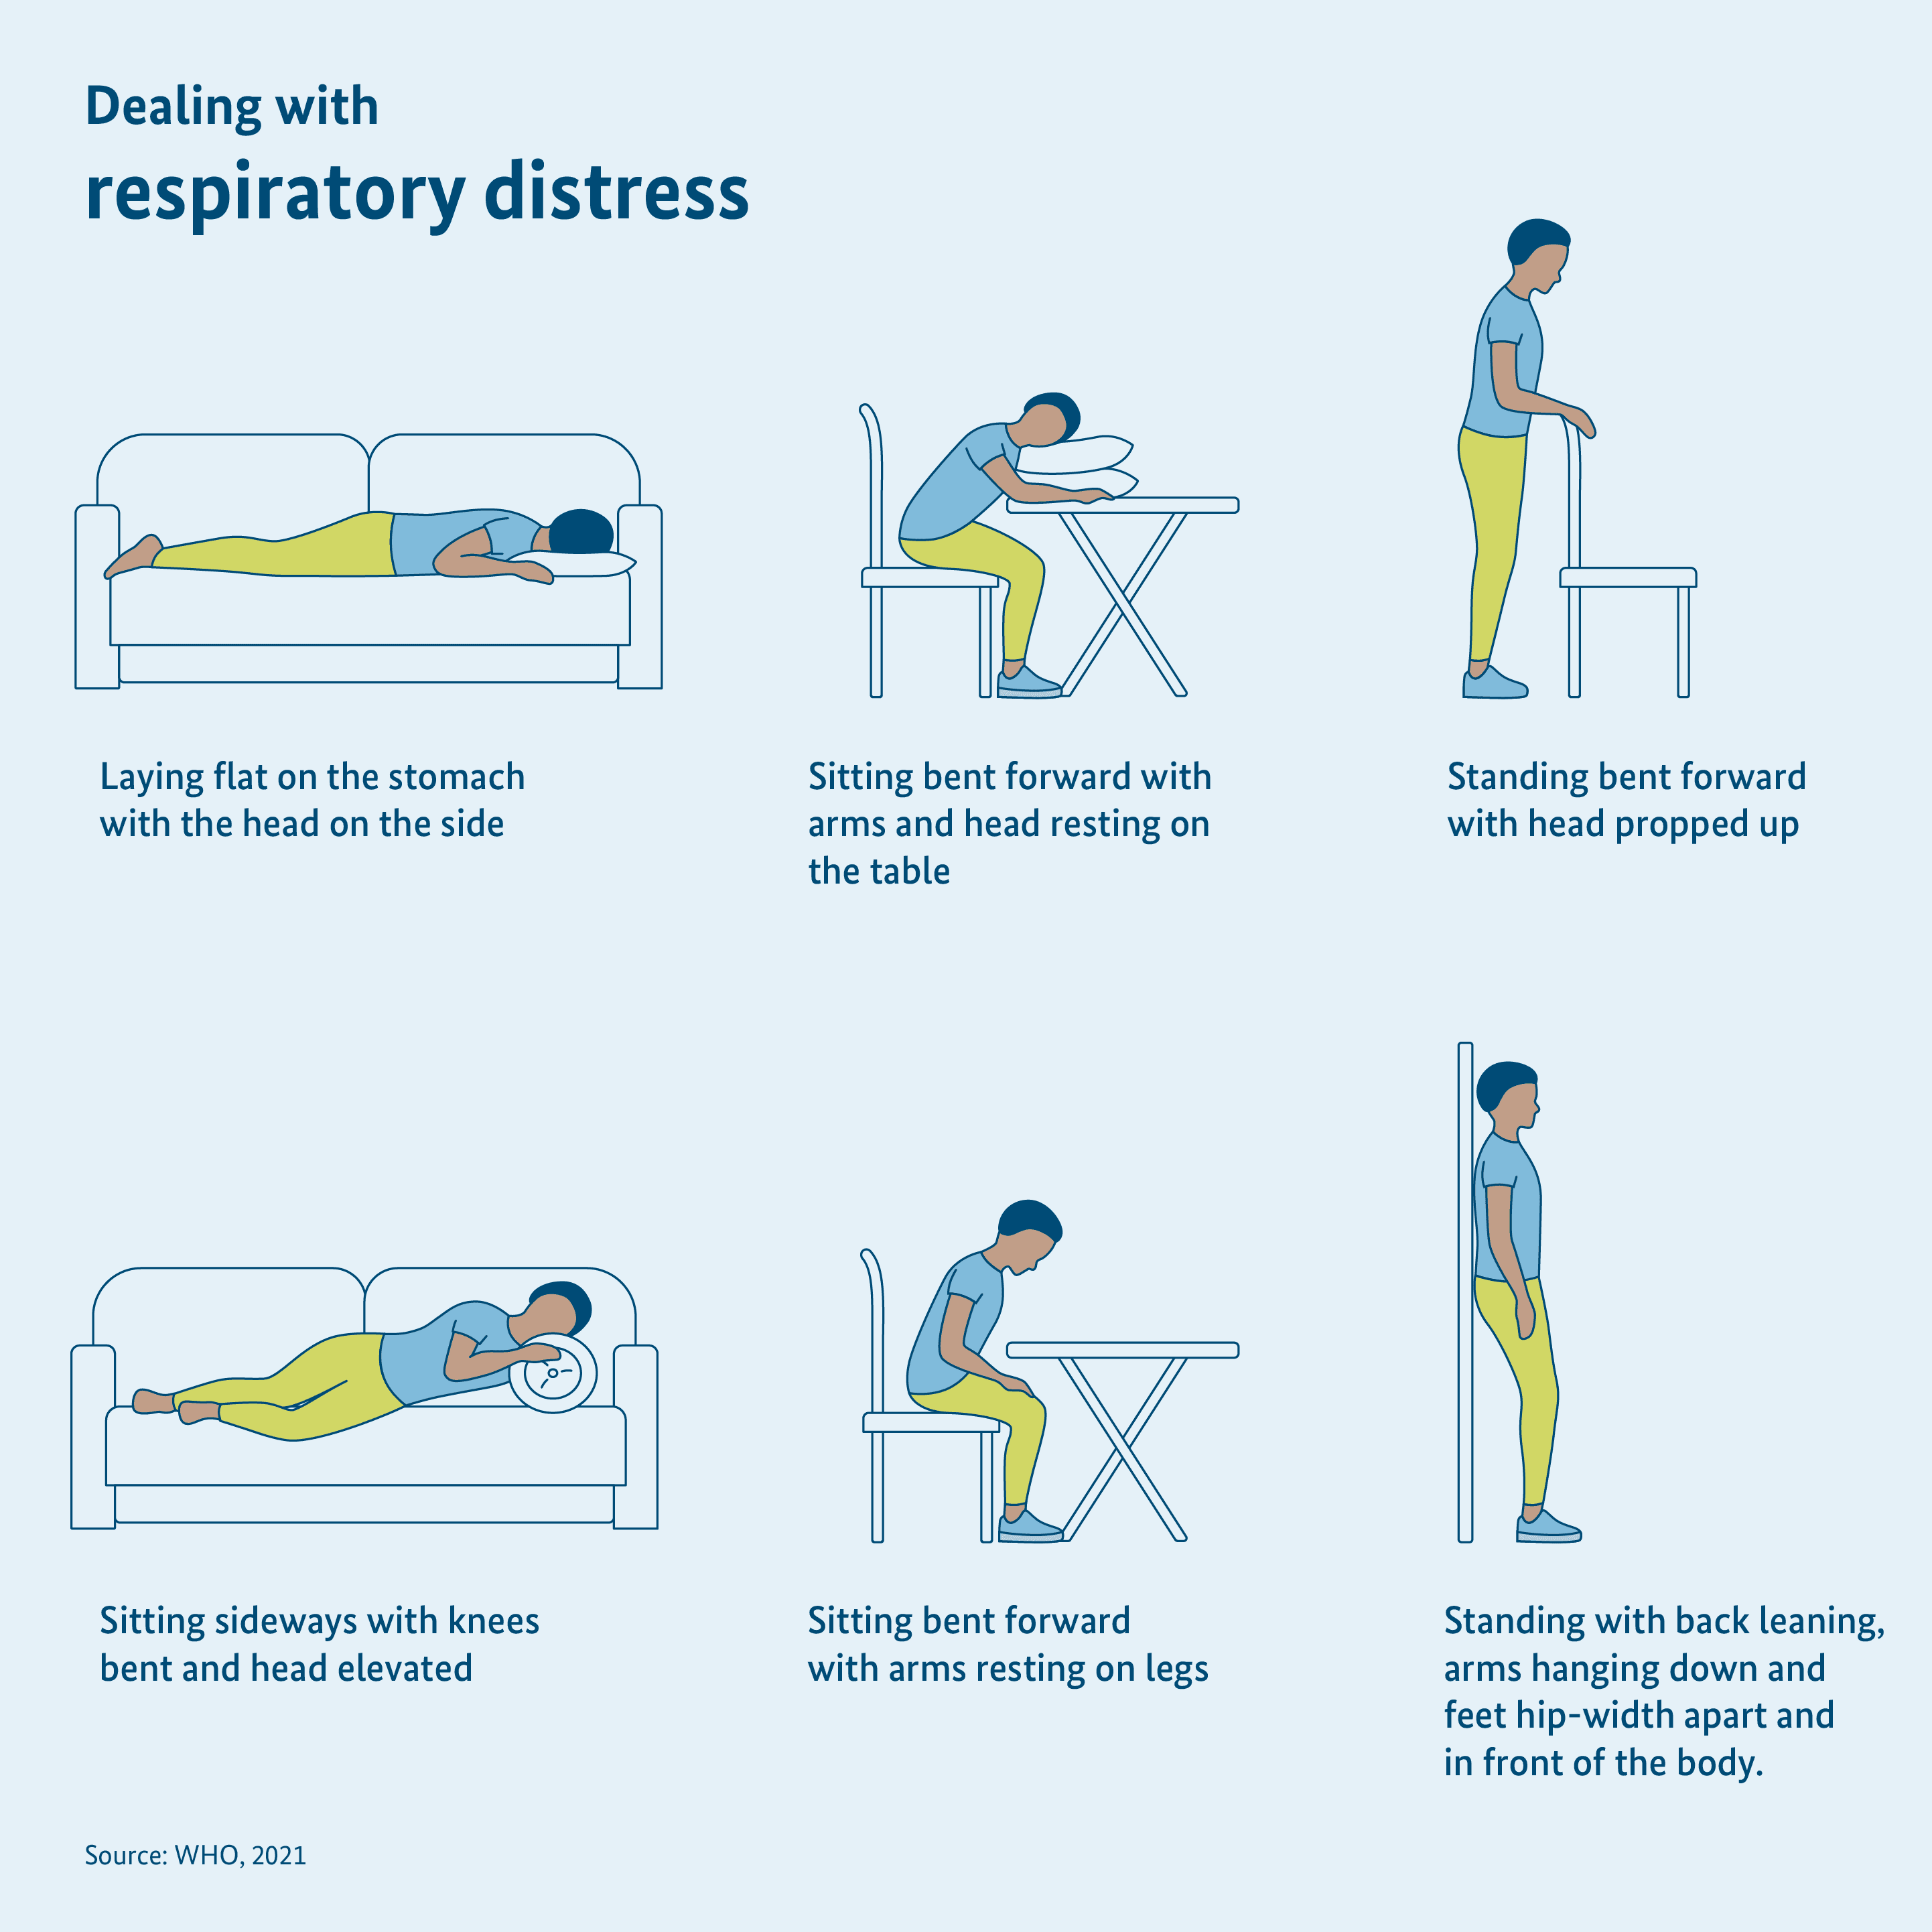 Illustration: Instructions for dealing with respiratory distress, person is shown in different postures 